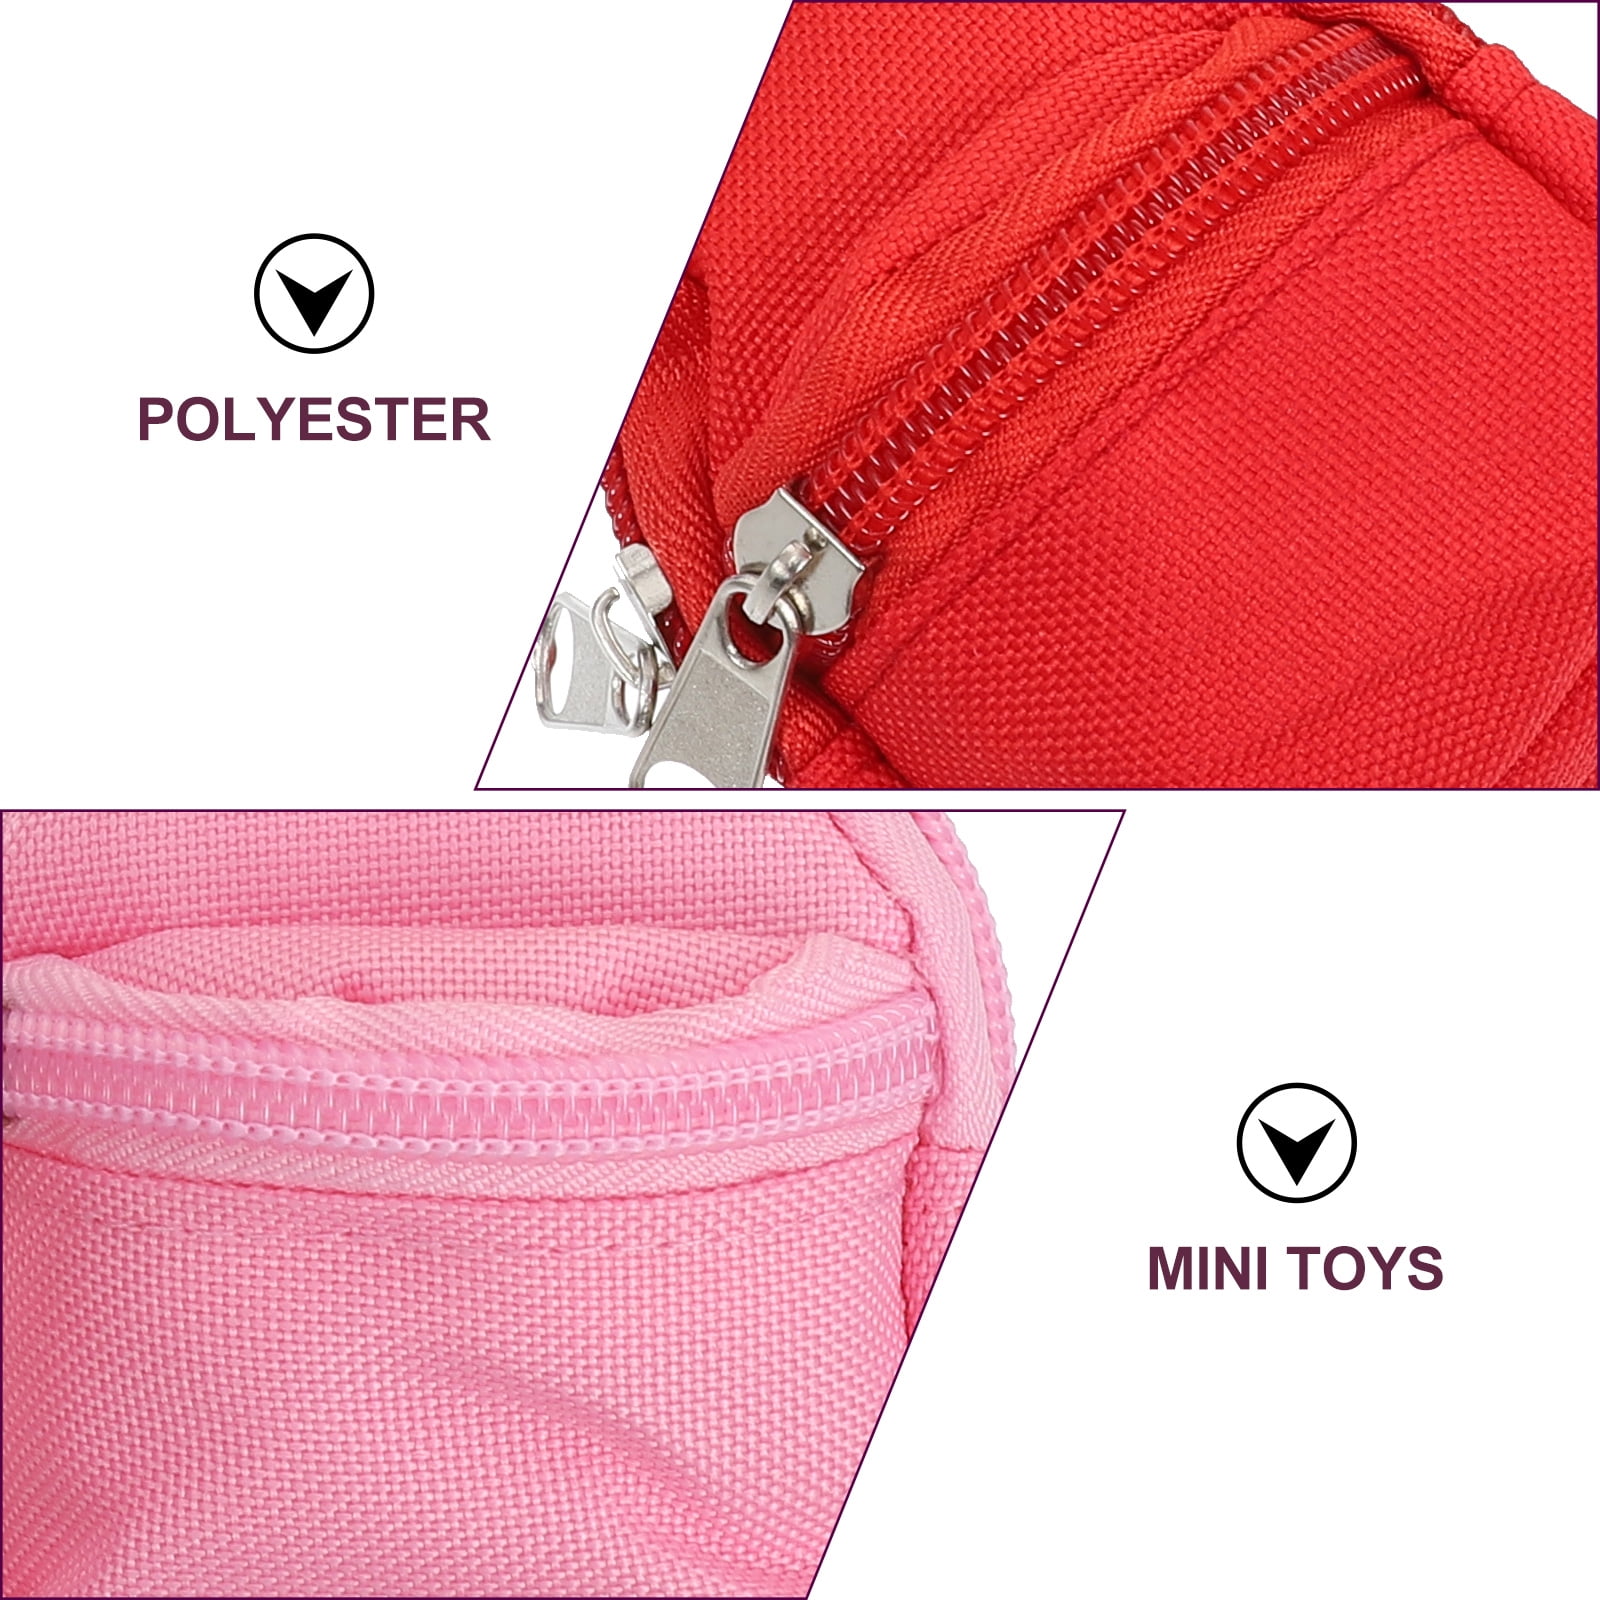  Mini Doll Backpack Mini Dolls School Bags Micro Backpack Mini  Backpack DollToys with Mini Supplies Micropacks Mini Doll Accessories Toy  Surprise with 10 Stationary Surprises Inside for Doll Play Sets 